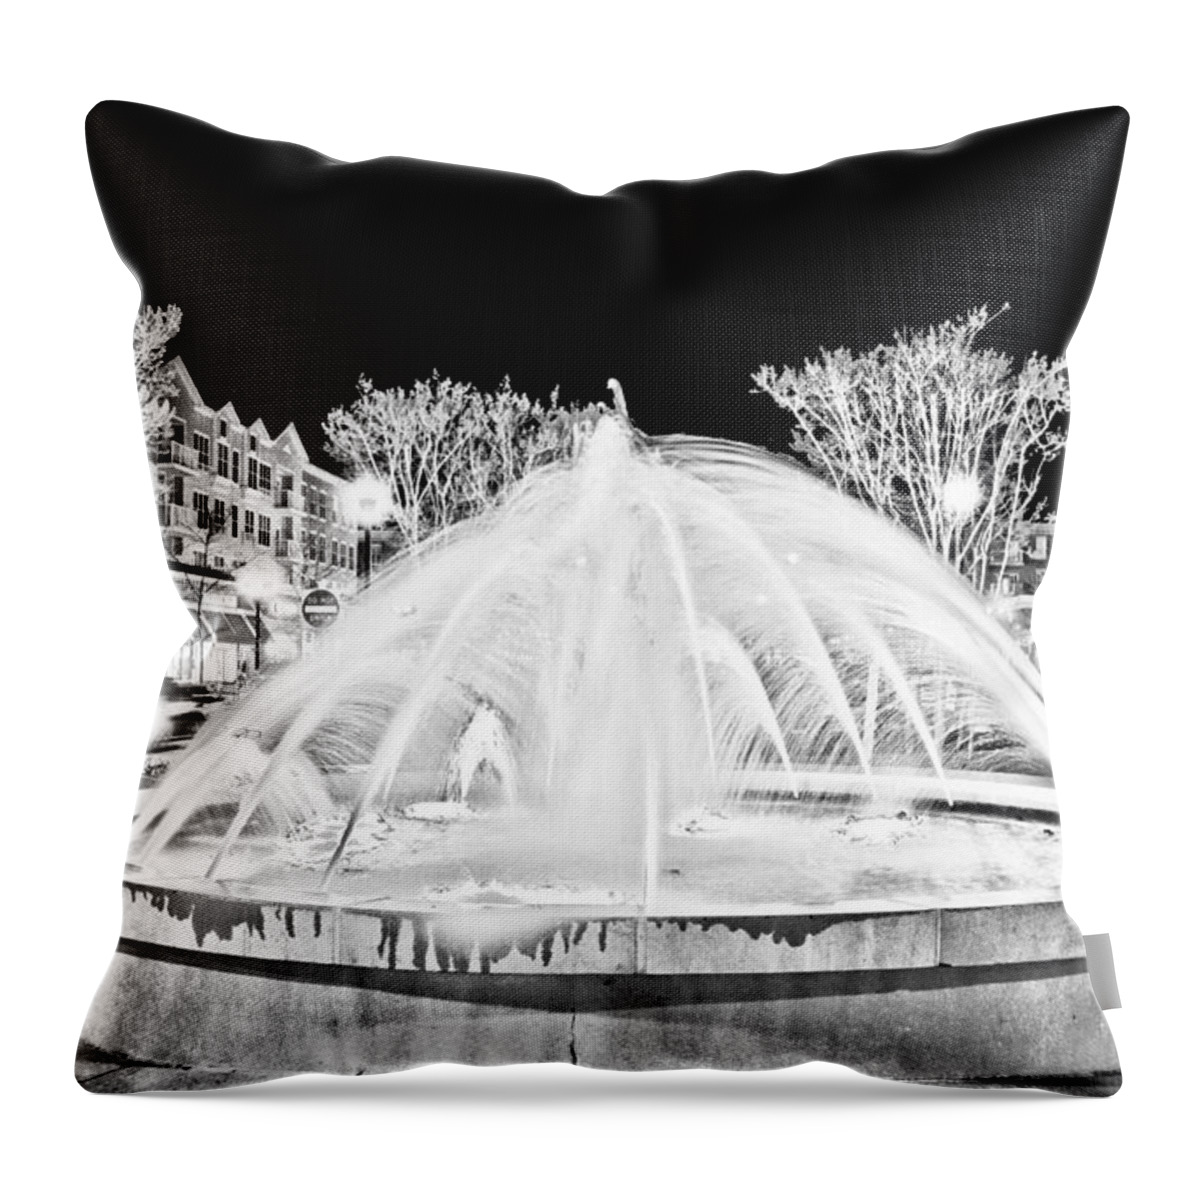 Market Common Throw Pillow featuring the photograph Market Common Fountain Infrared by Bill Barber